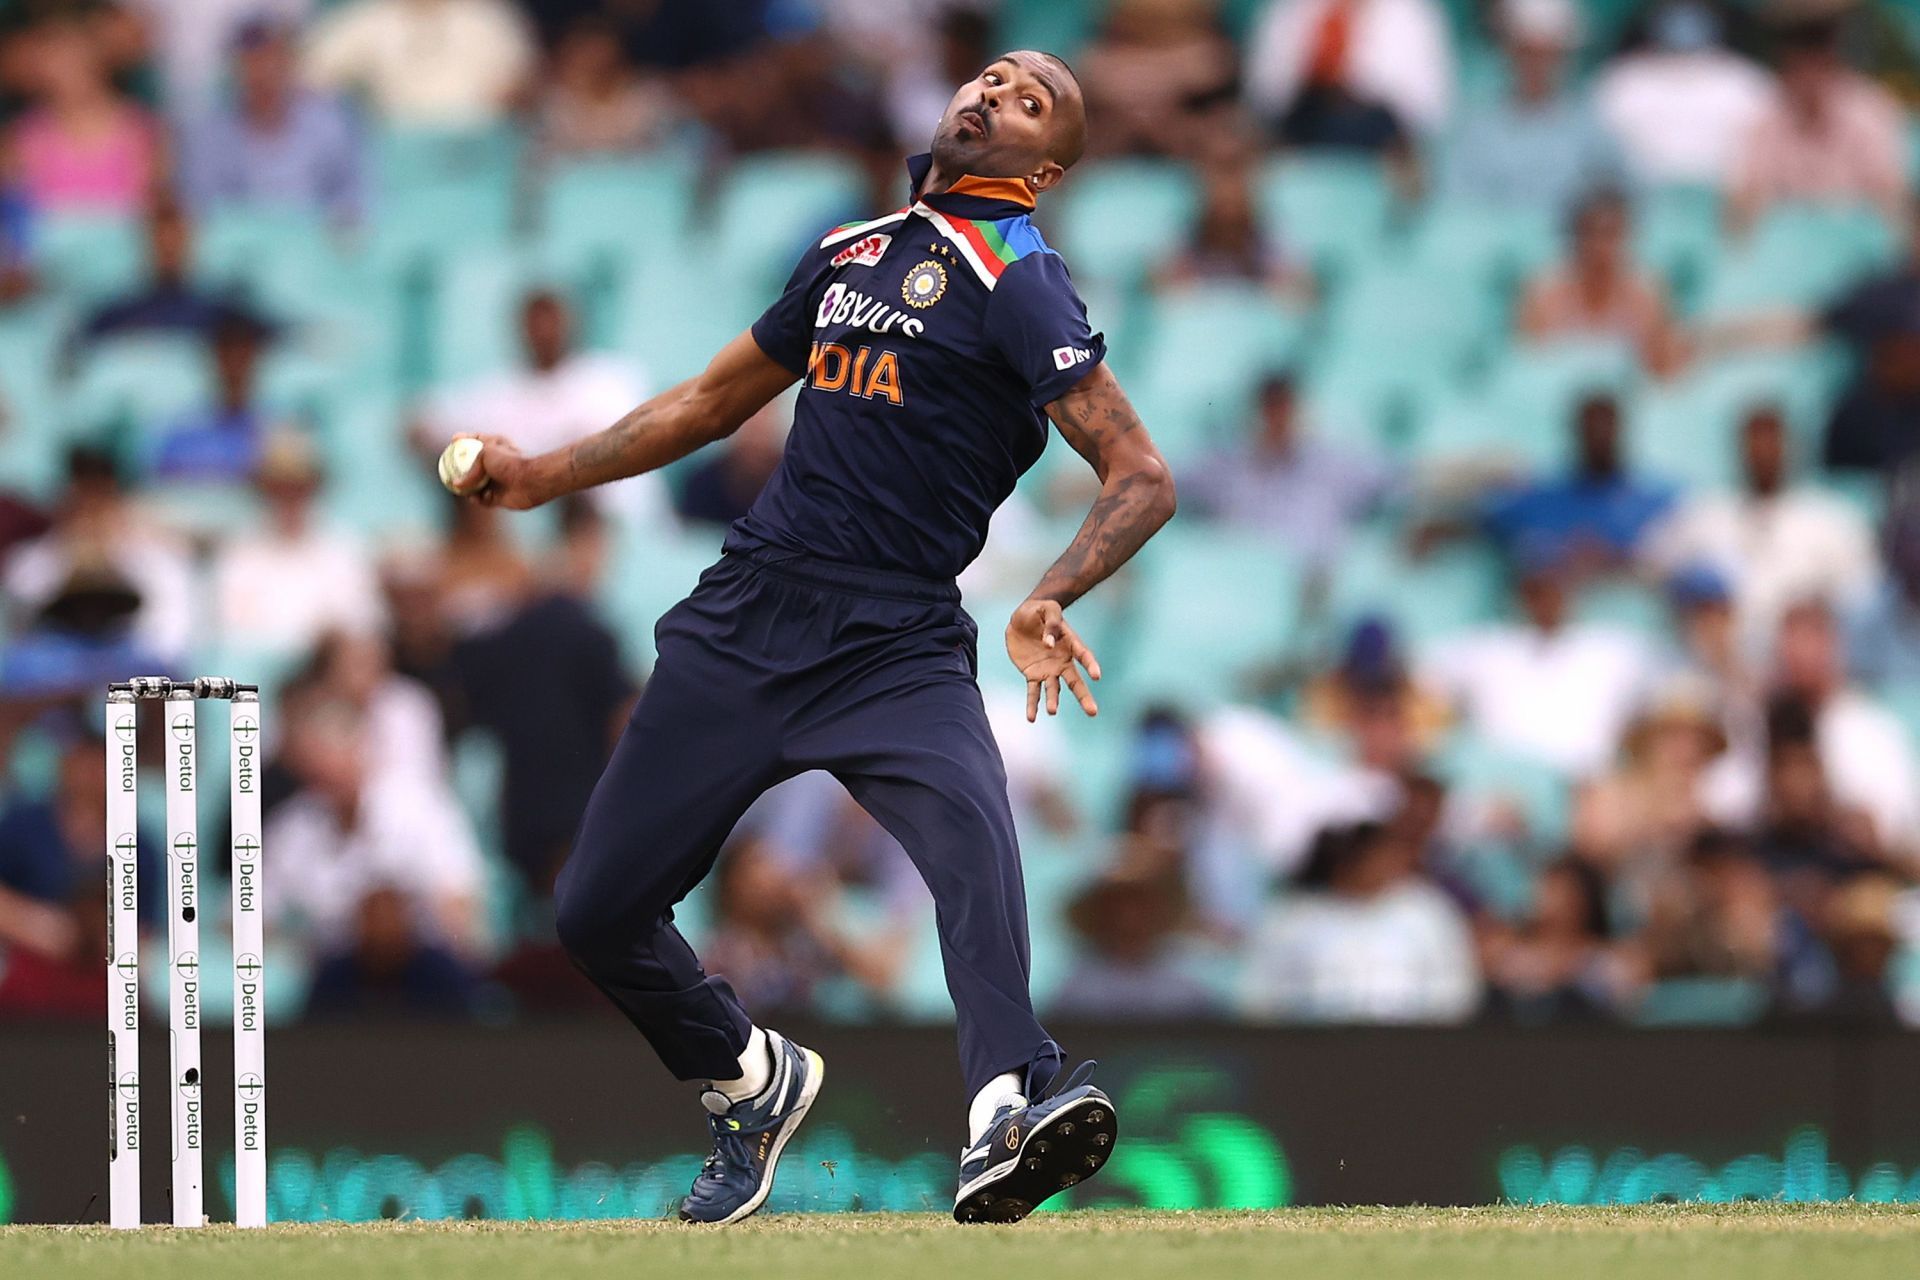 Hardik Pandya&#039;s return to full fitness and bowling continues after a recent back injury